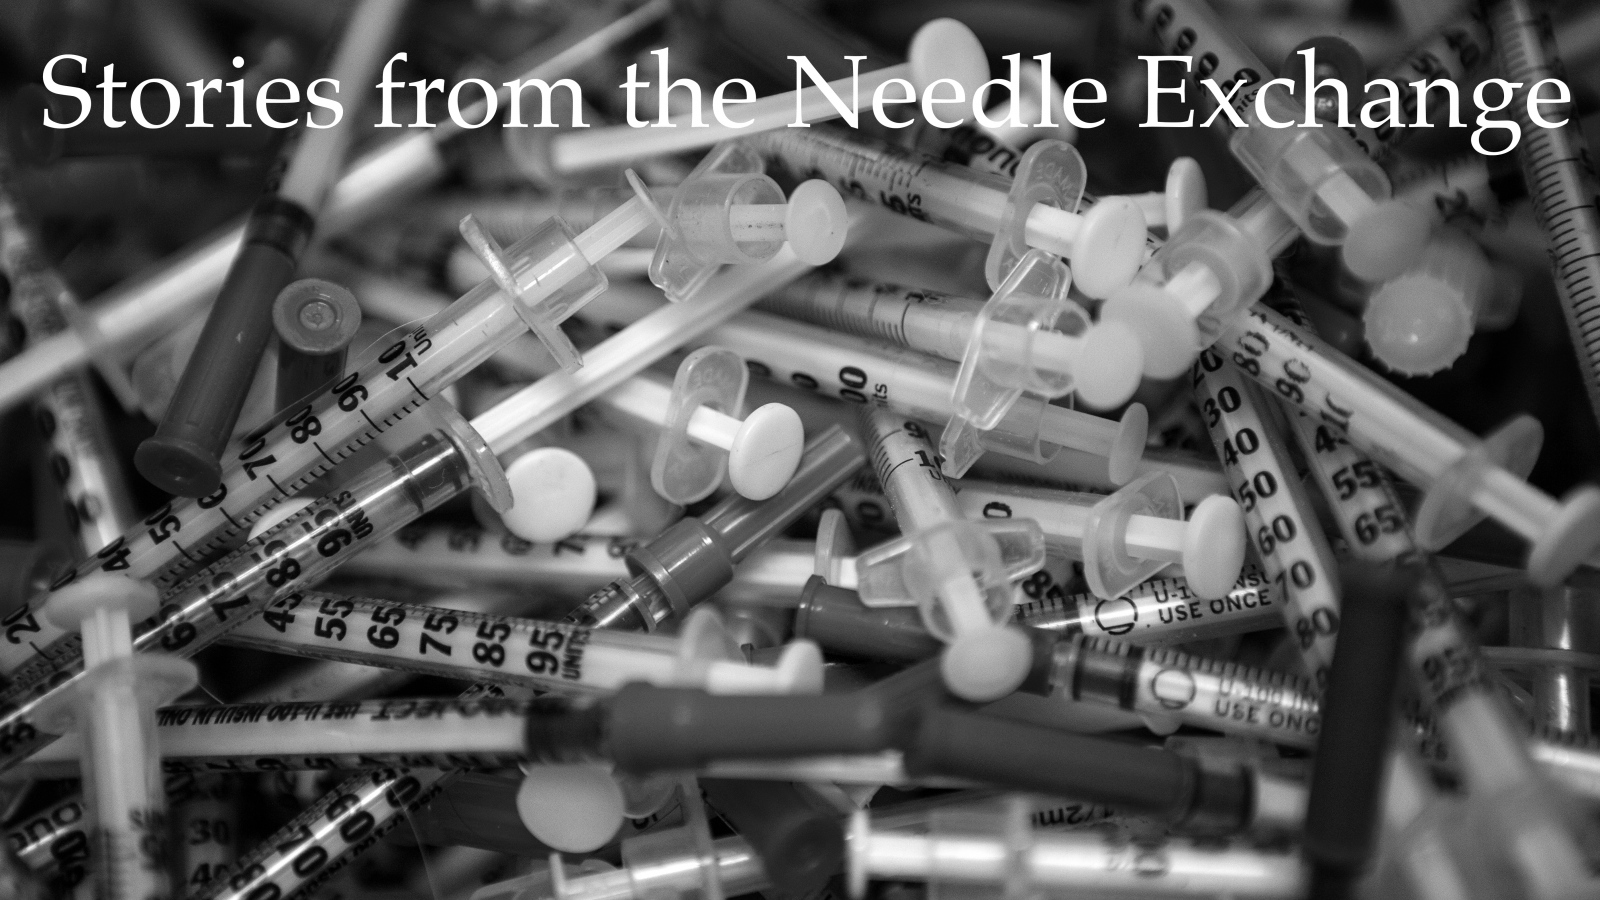 Thumbnail of Stories from the Needle Exchange - Interview 3